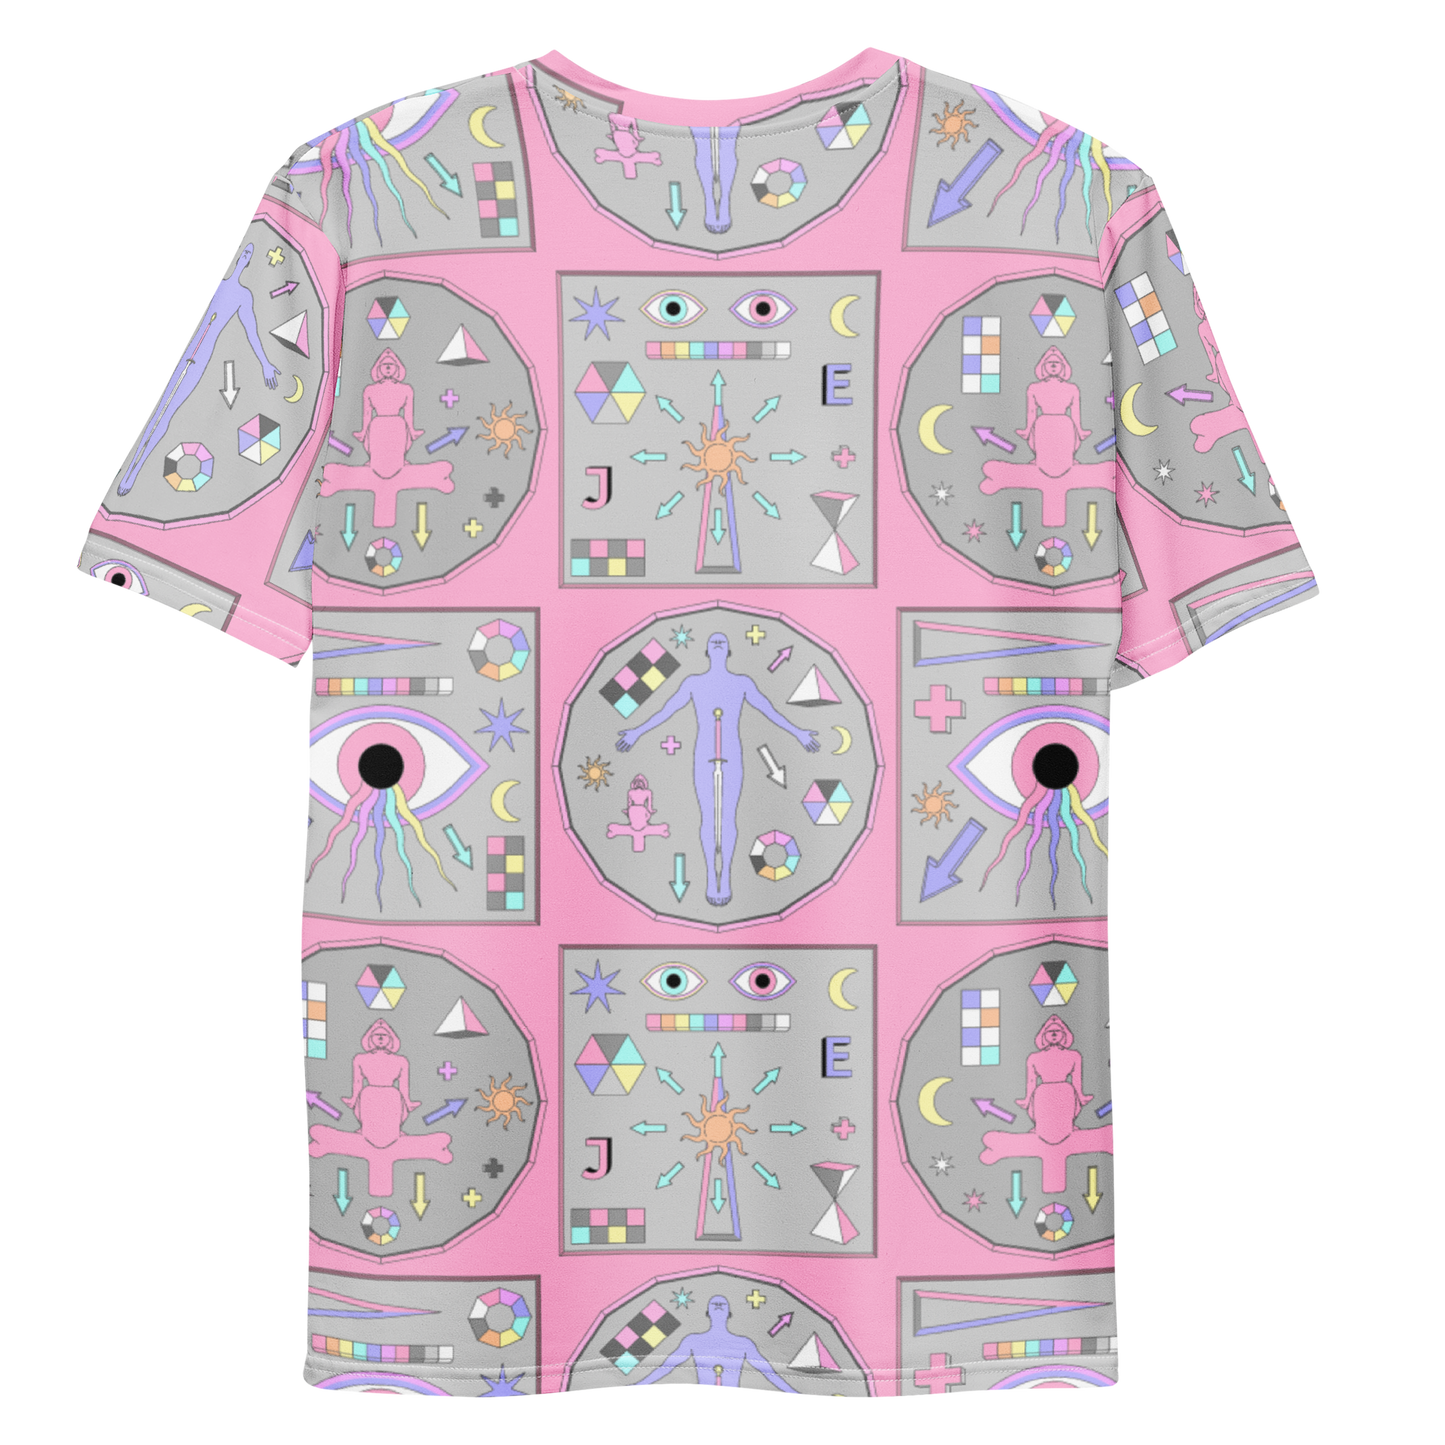 Pink Augmented Reality Tracker t-shirt